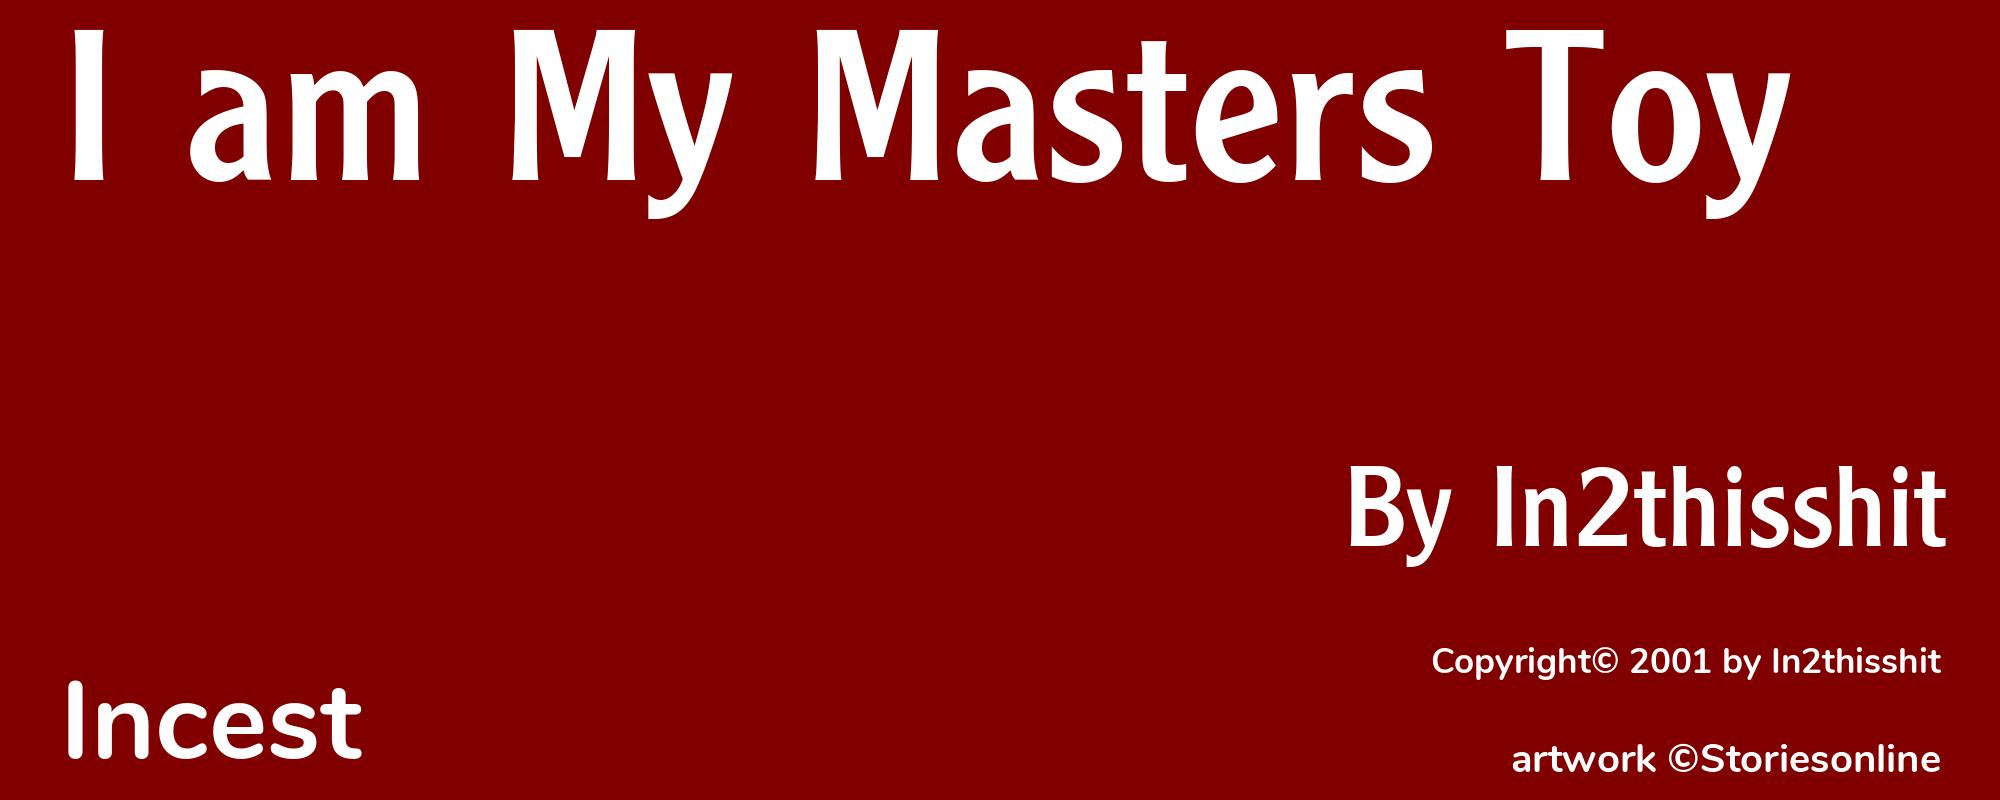 I am My Masters Toy - Cover